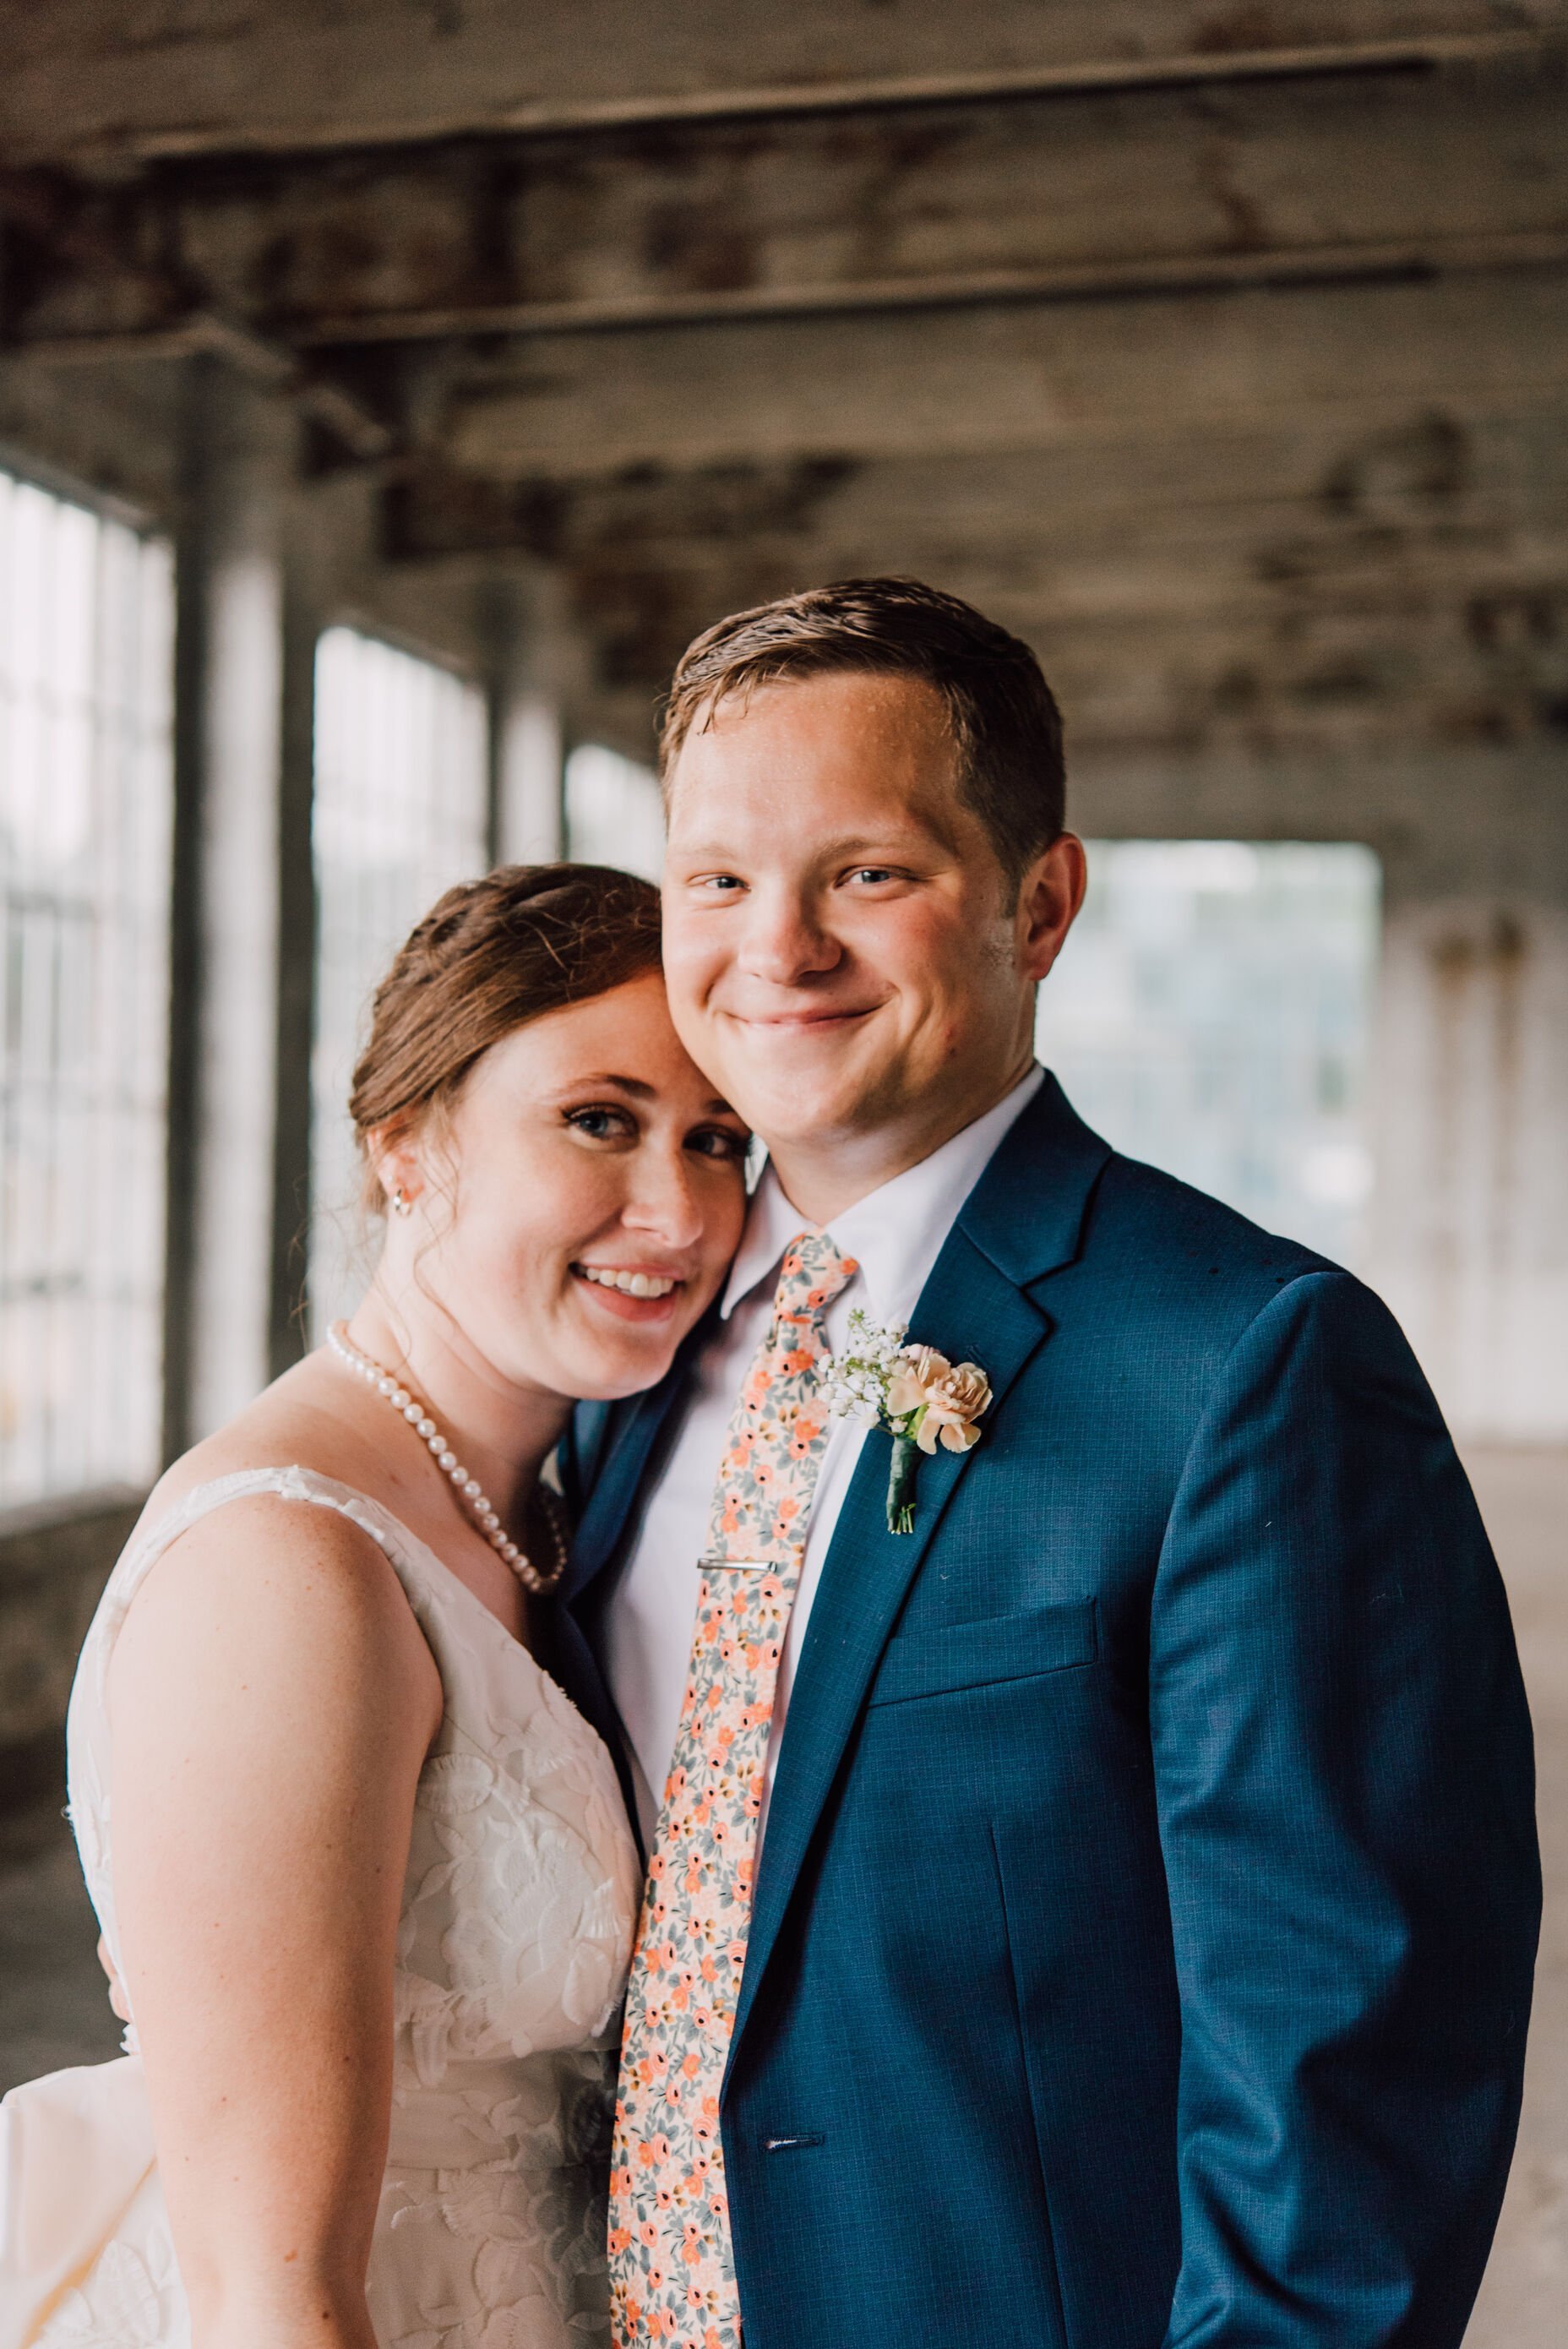  Bride and groom smile at their photographer at their warehouse wedding 